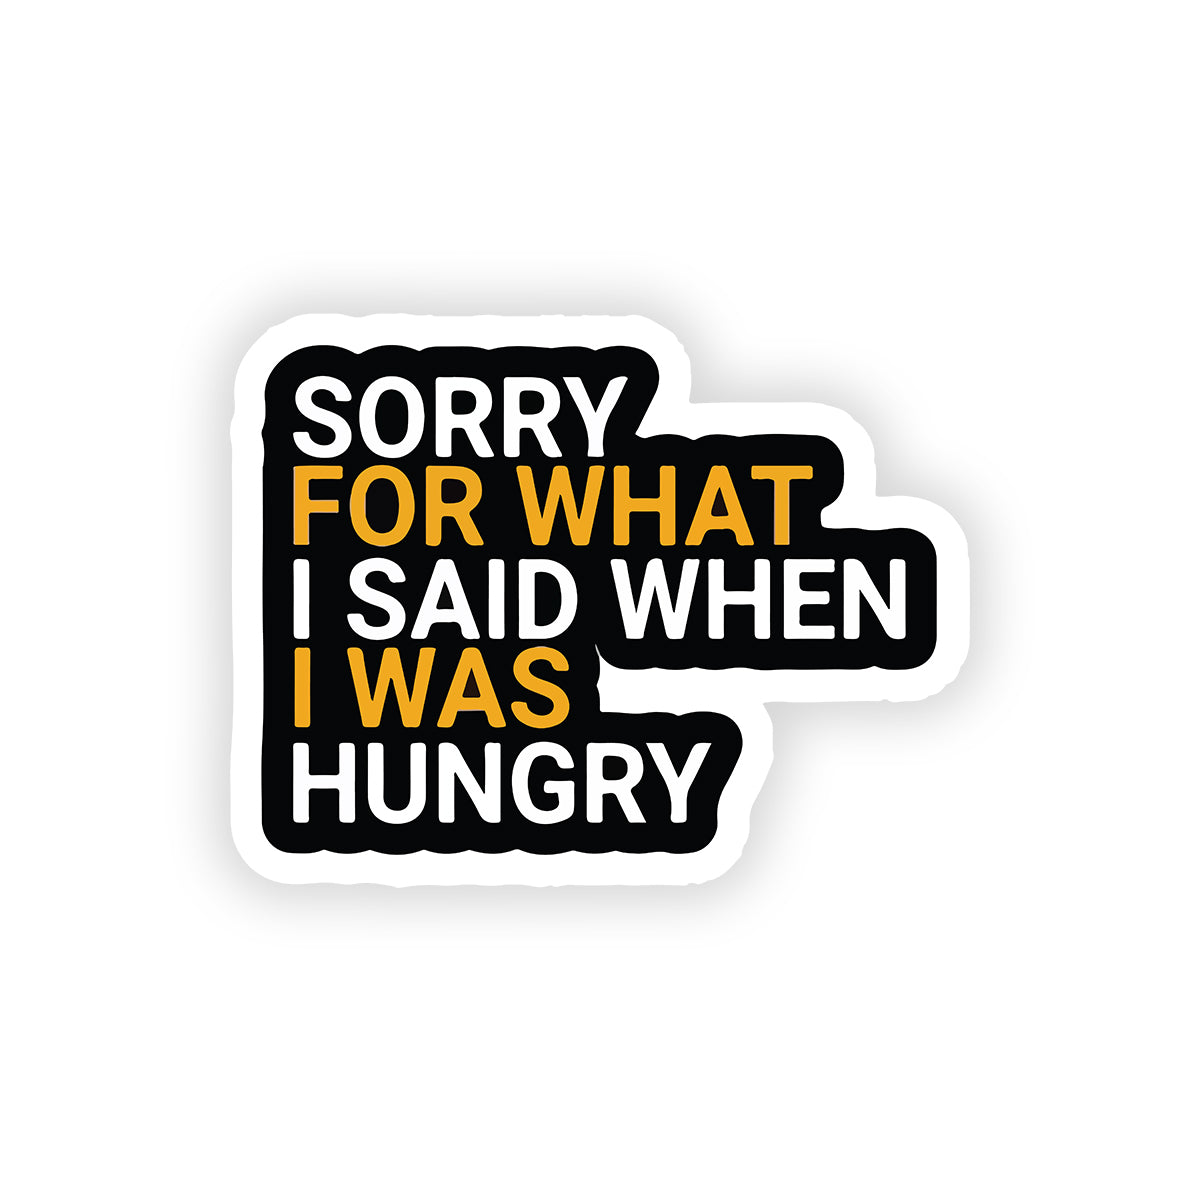 Sorry for what i said when i was hungry